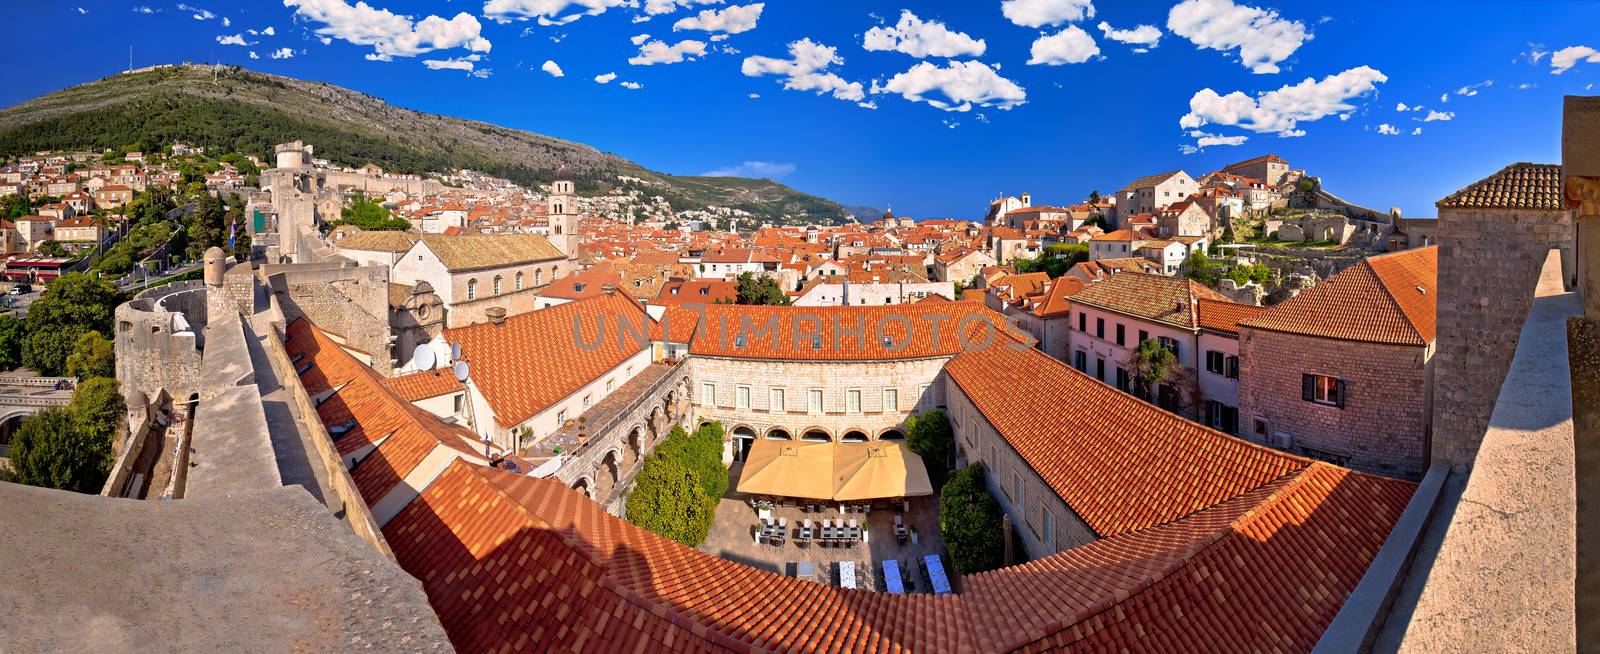 Historic town of Dubrovnik panoramic view from walls by xbrchx